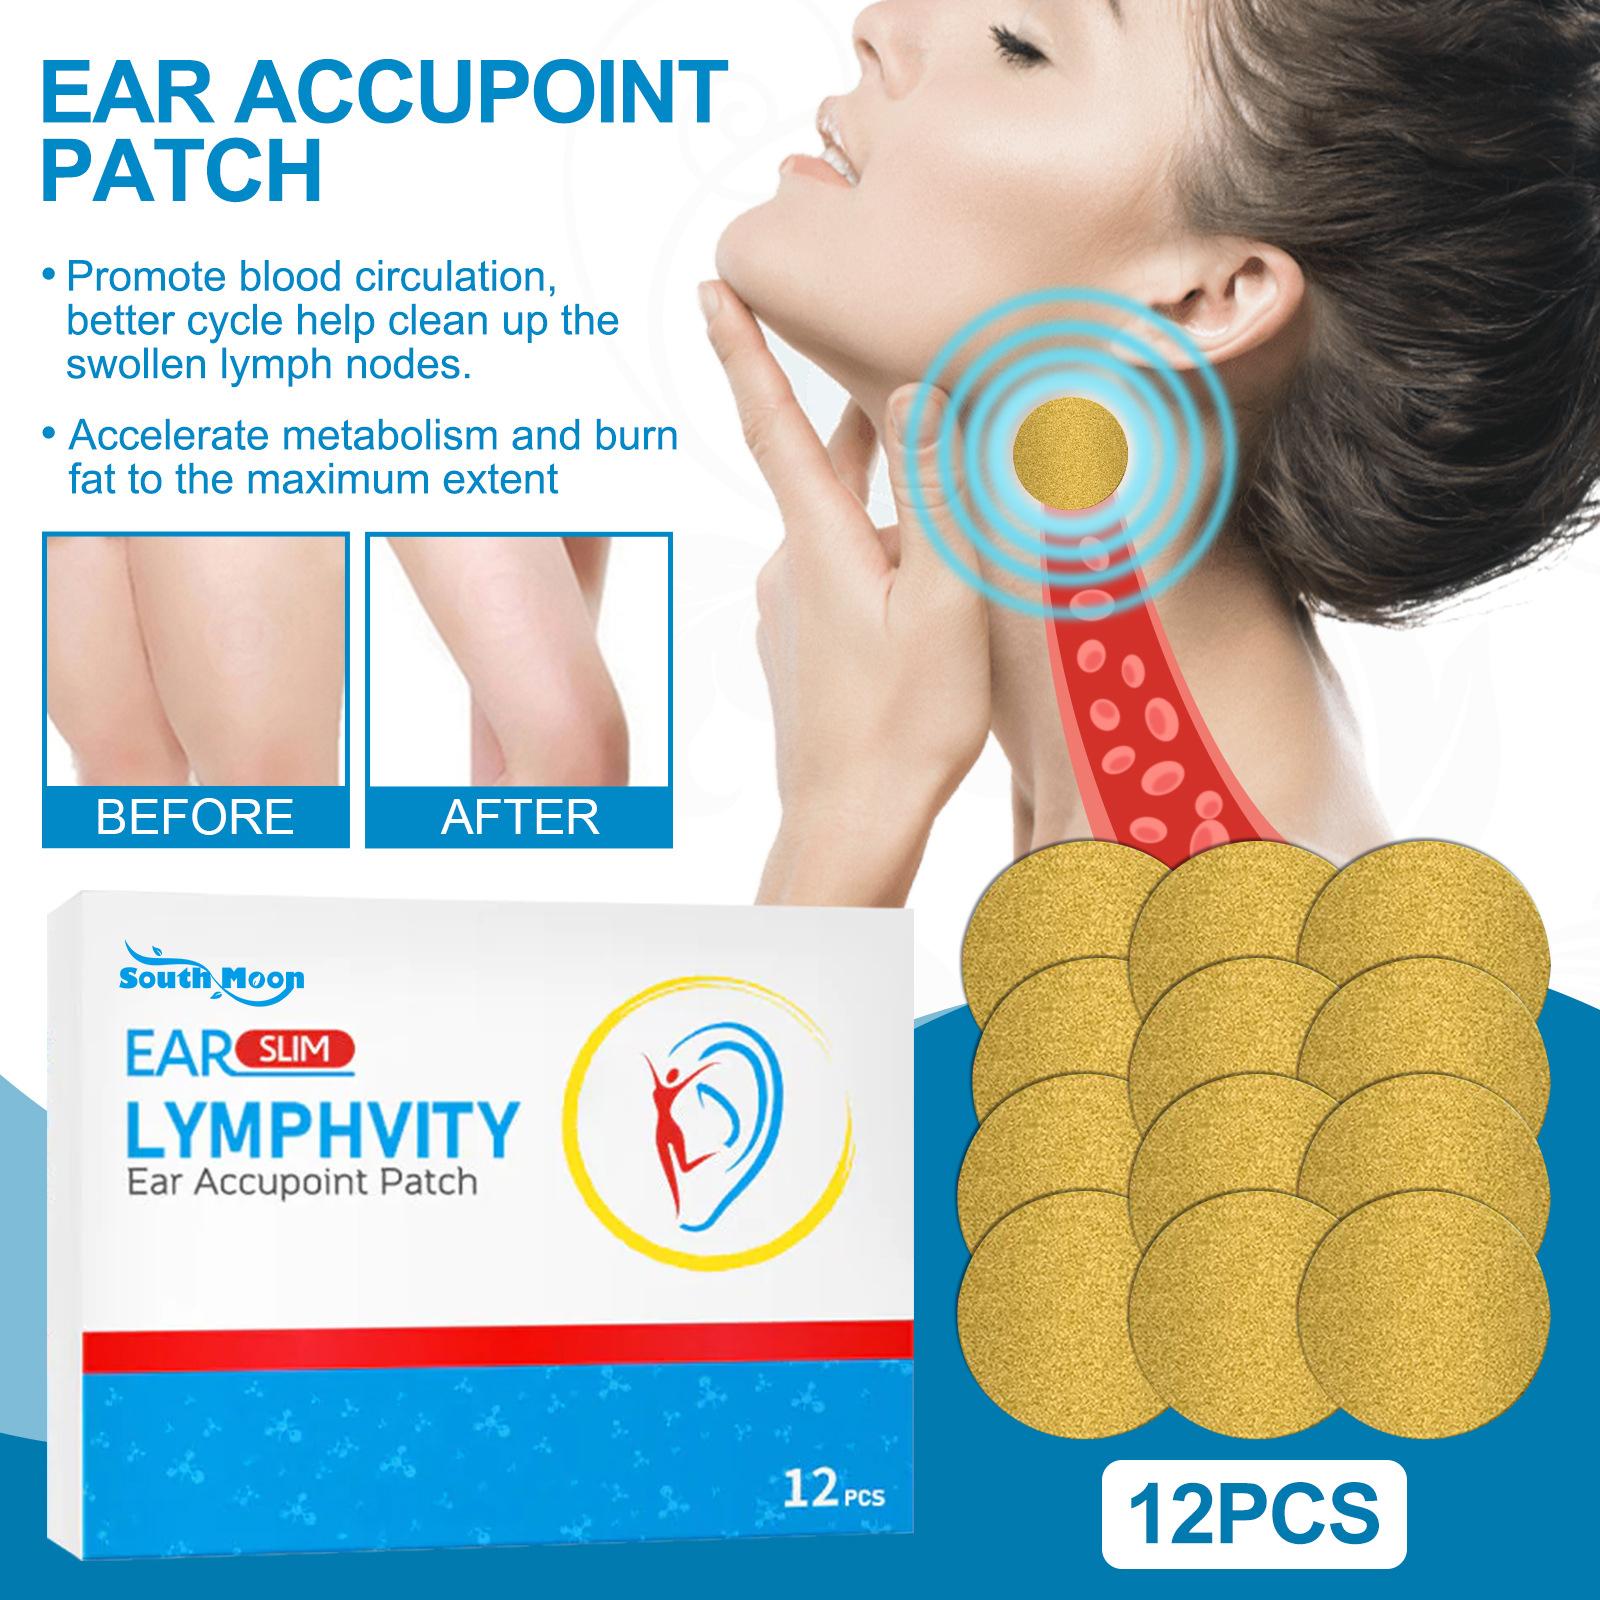 South Moon 12PCS Ear Acupuncture Point Patch Lymphatic Swelling Relief Acupuncture Patch